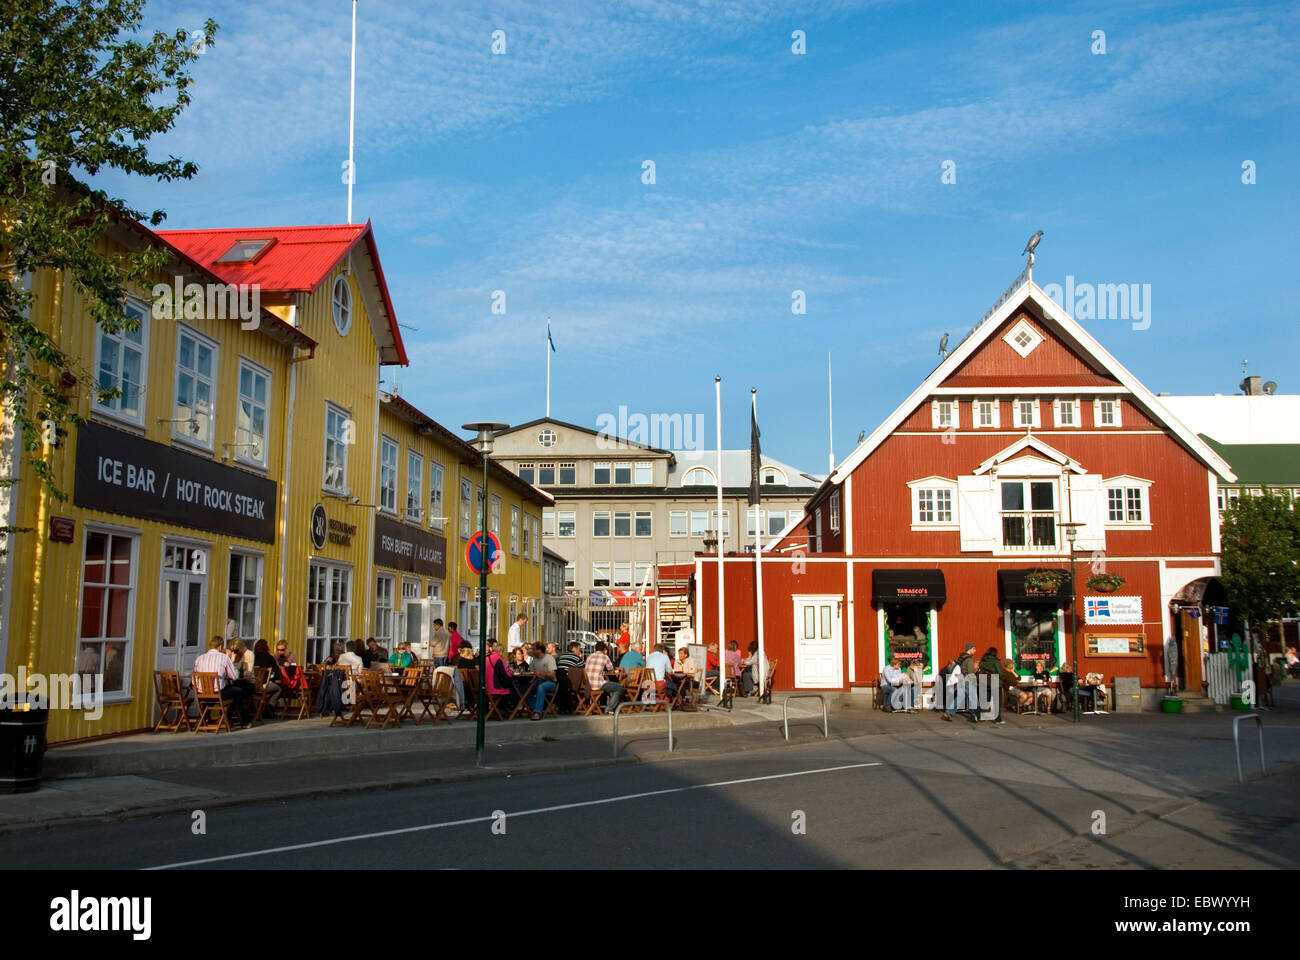 square in the city, Iceland, Reykjavik Stock Photo